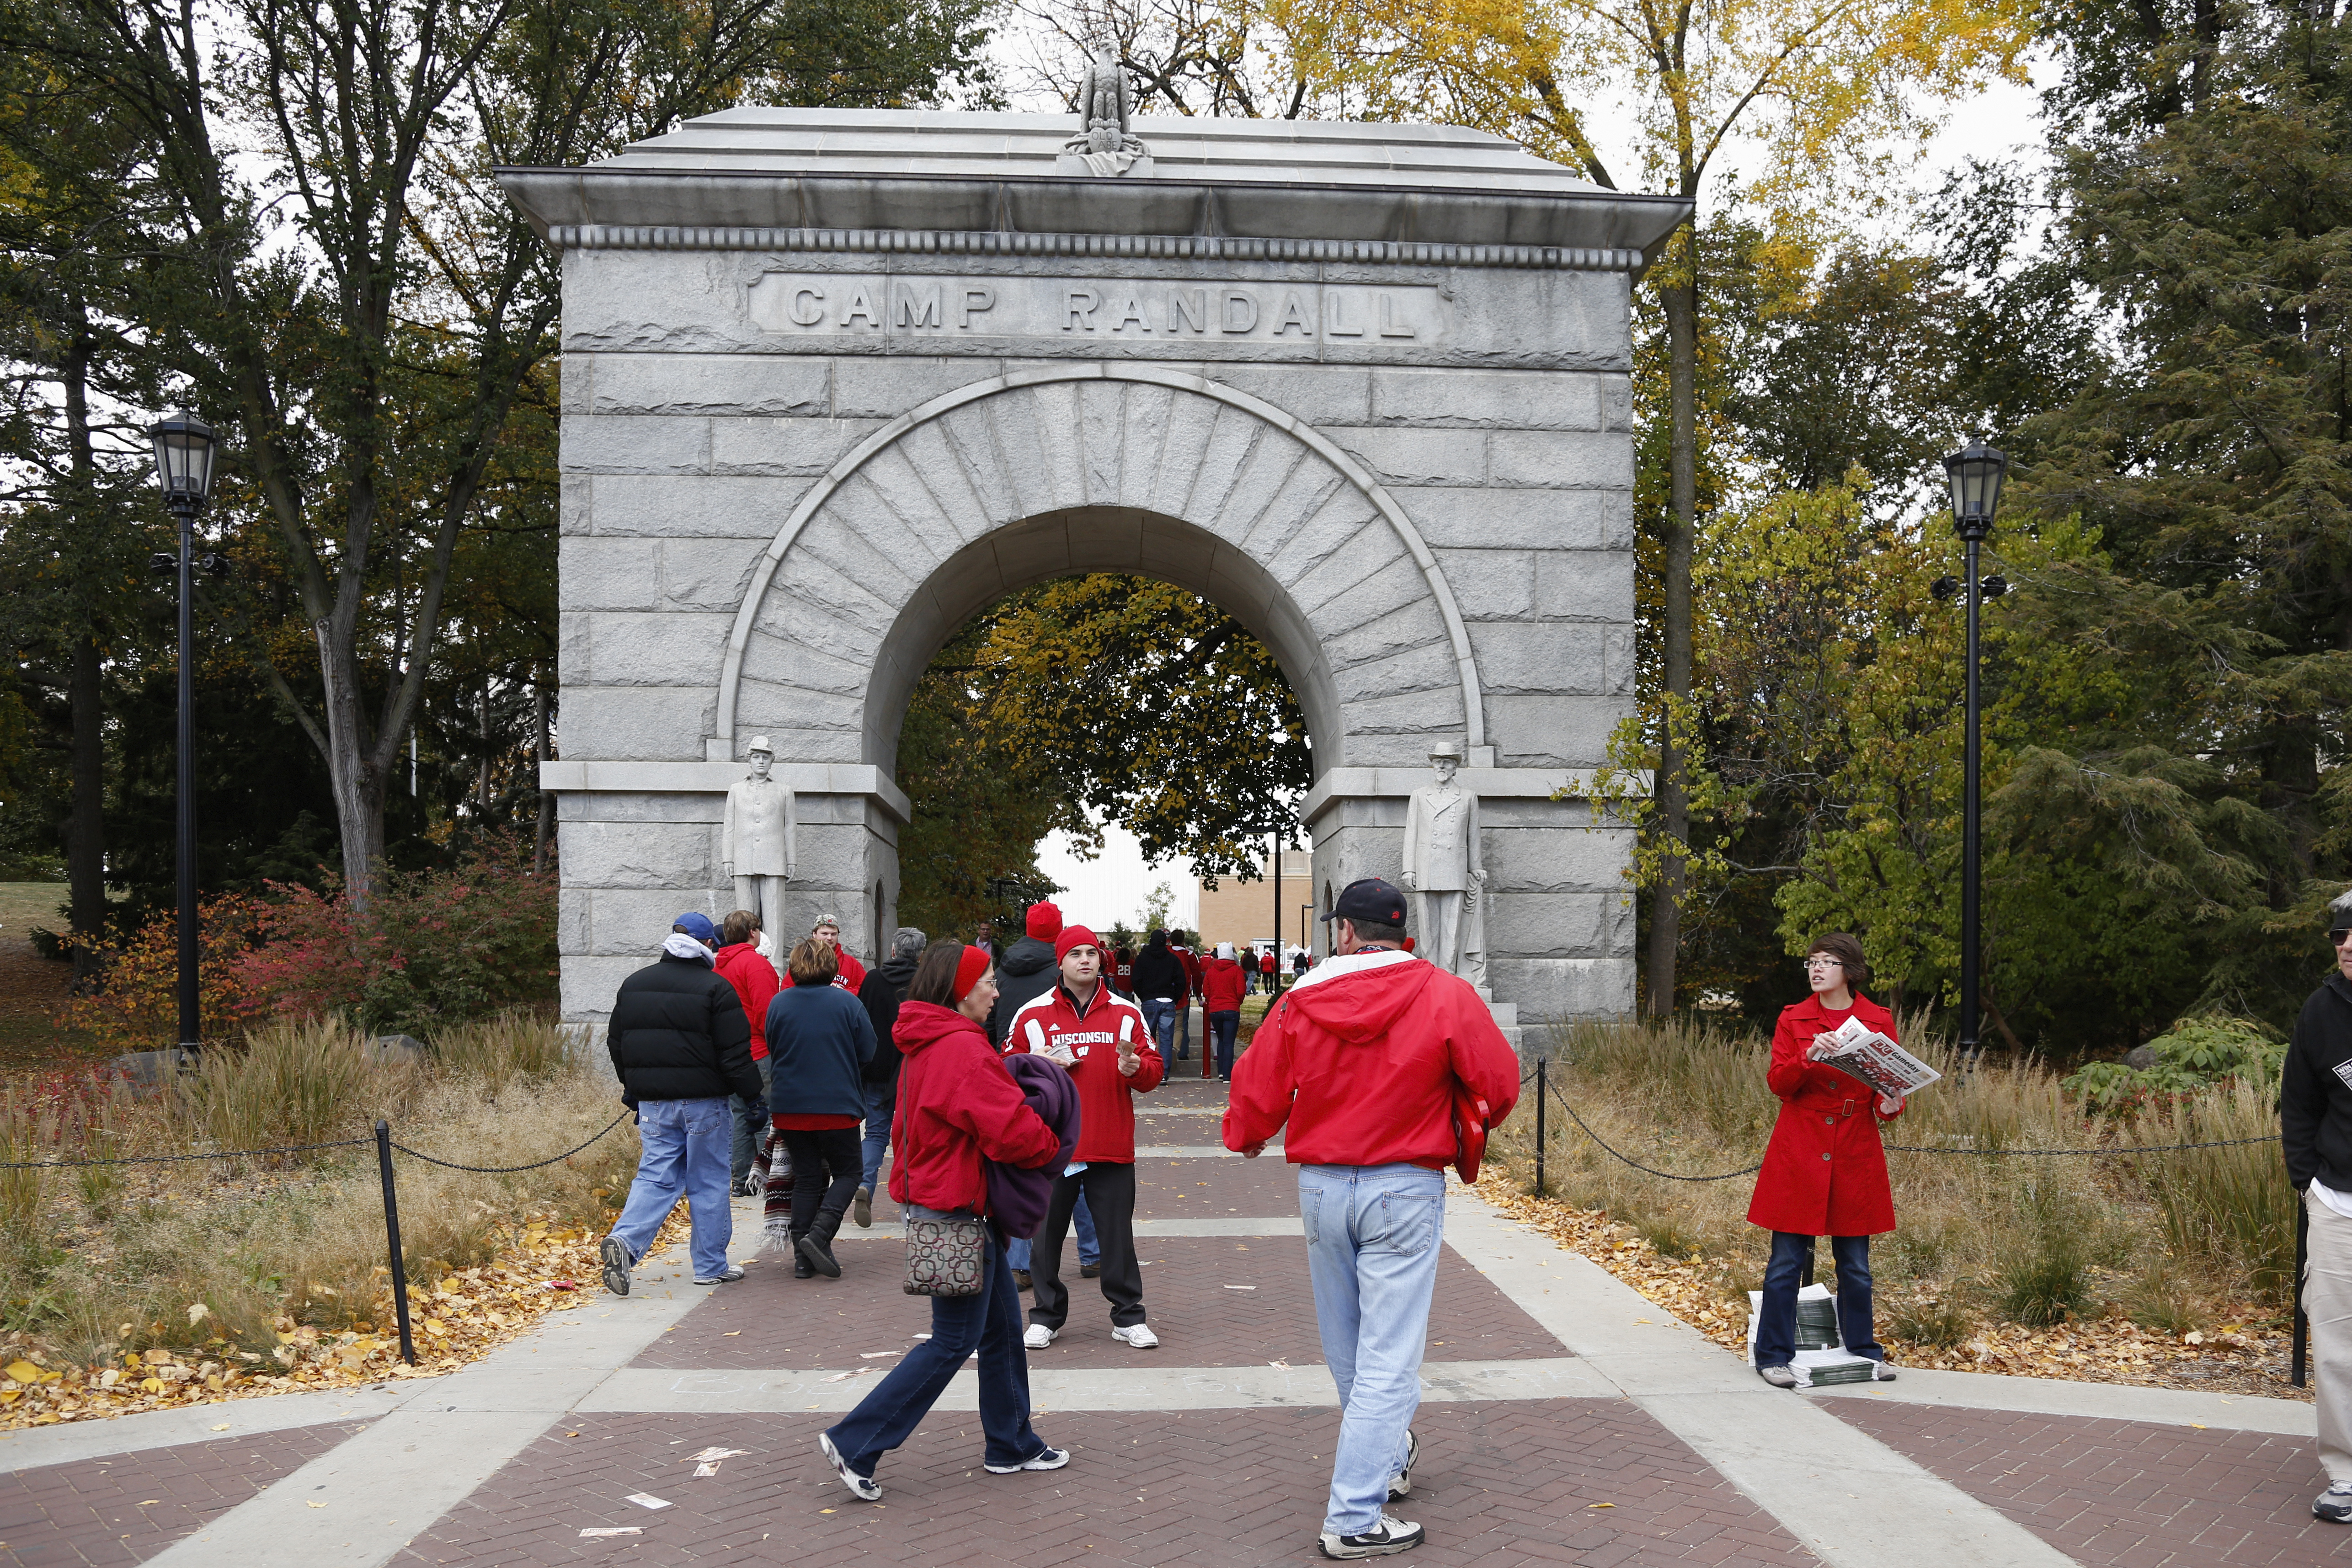 Wisconsin Badgers fans make their way through the Camp Randall Memorial Arch on their way to the game against the Illinois Fighting Illini at Camp Randall Stadium in Madison, Wis. on Oct. 6, 2012.